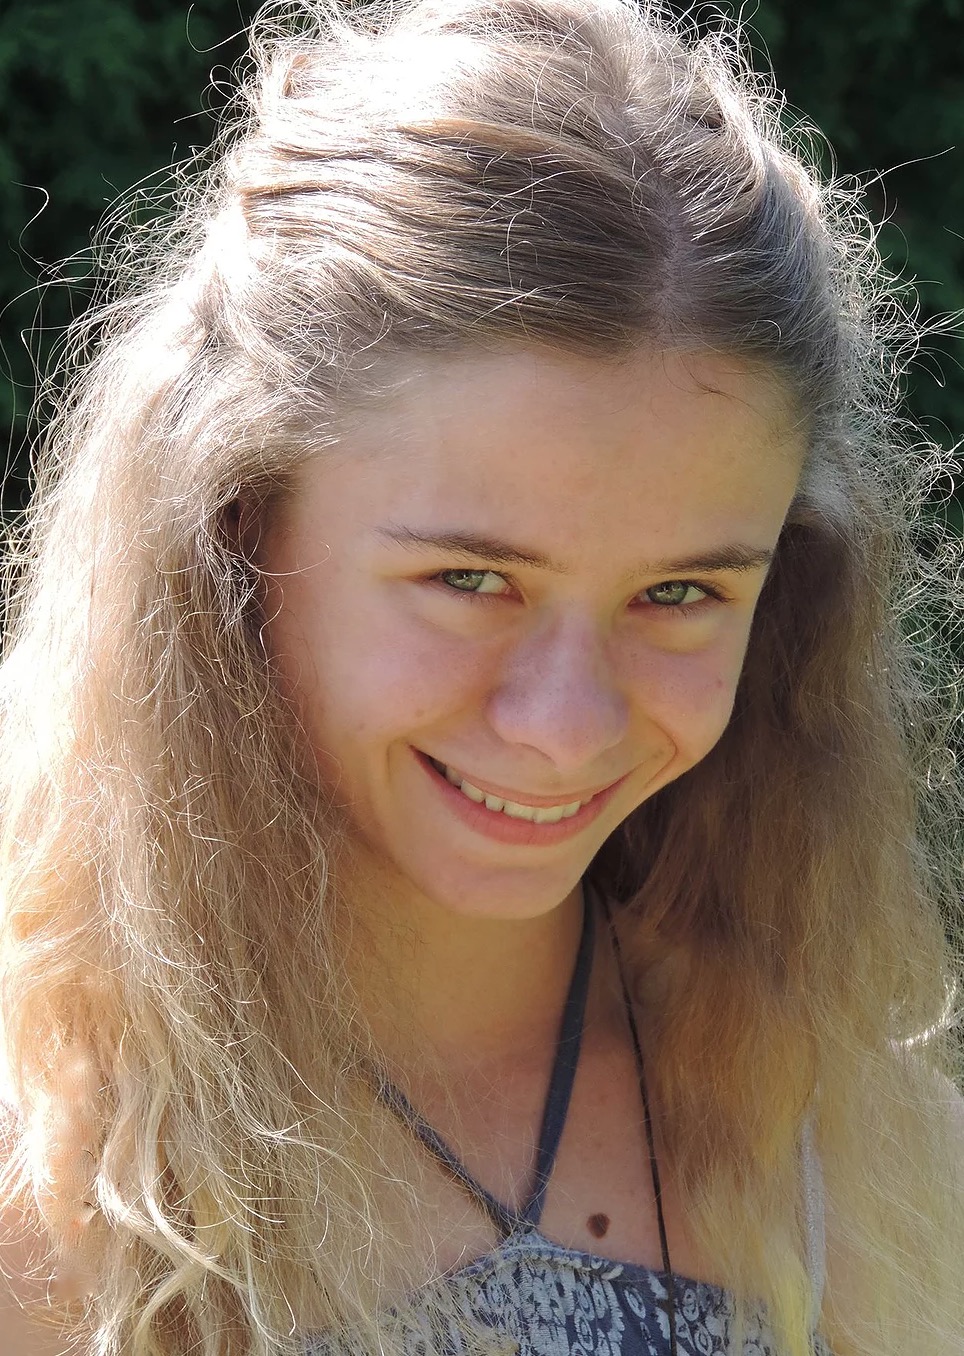 Christina Meier von Dreien –  a 16-year old girl in service of Peace and Light